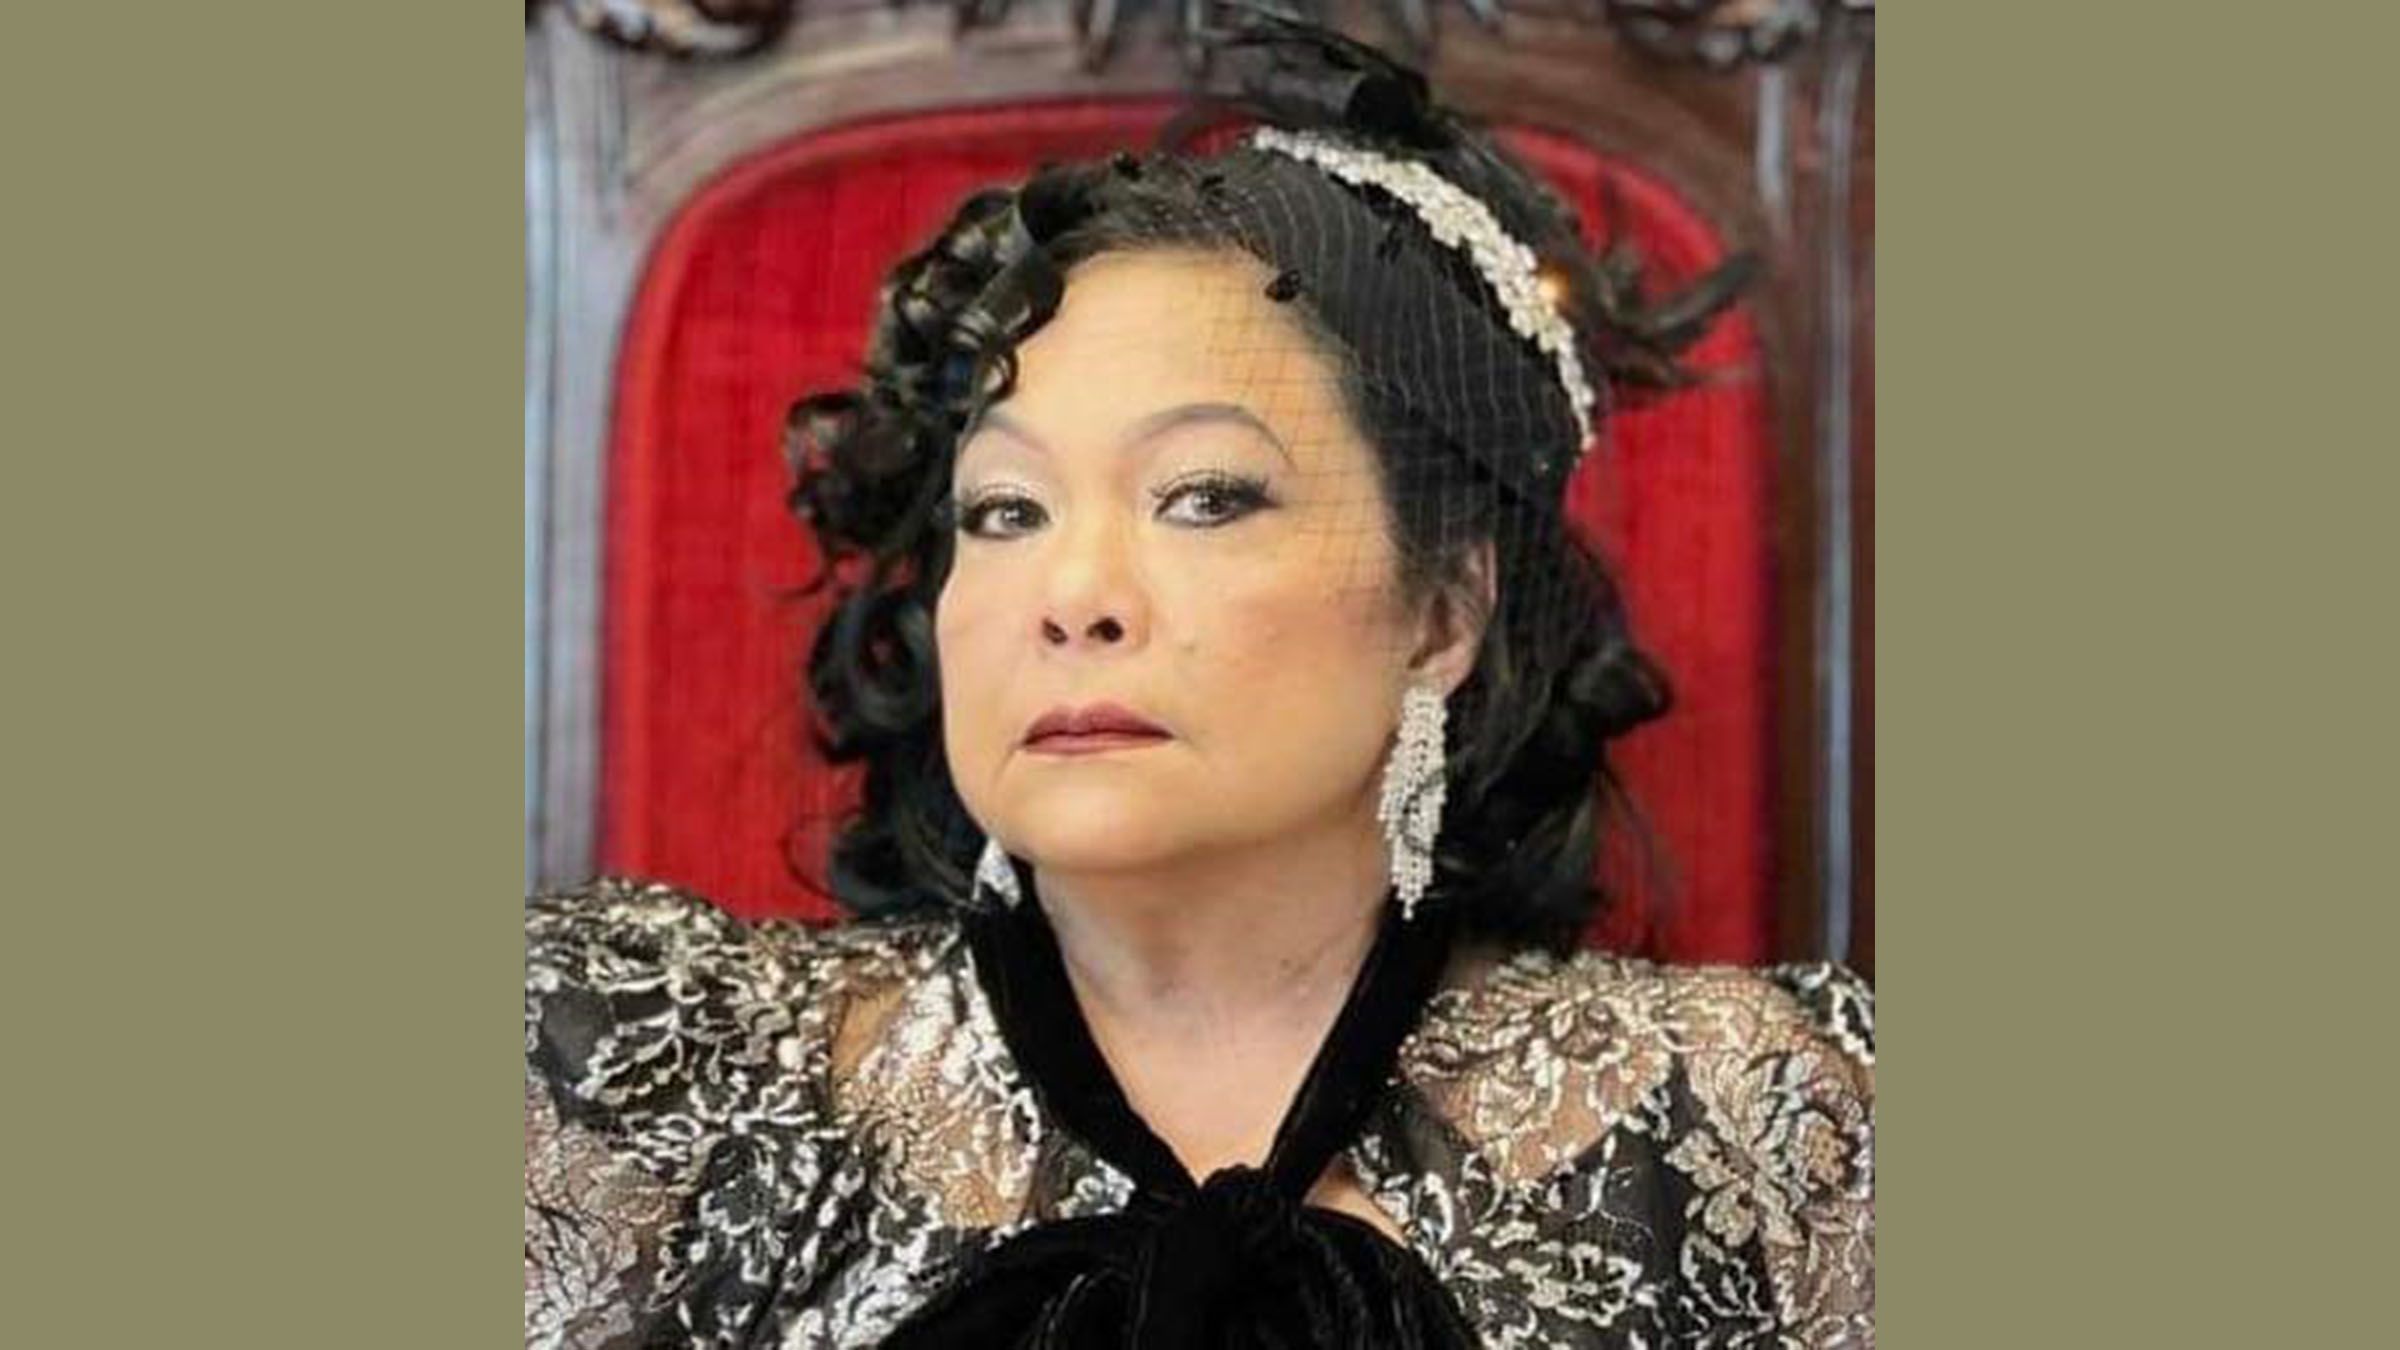 La Aunor’s 70th birthday to be feted with showing of 1984 film classic